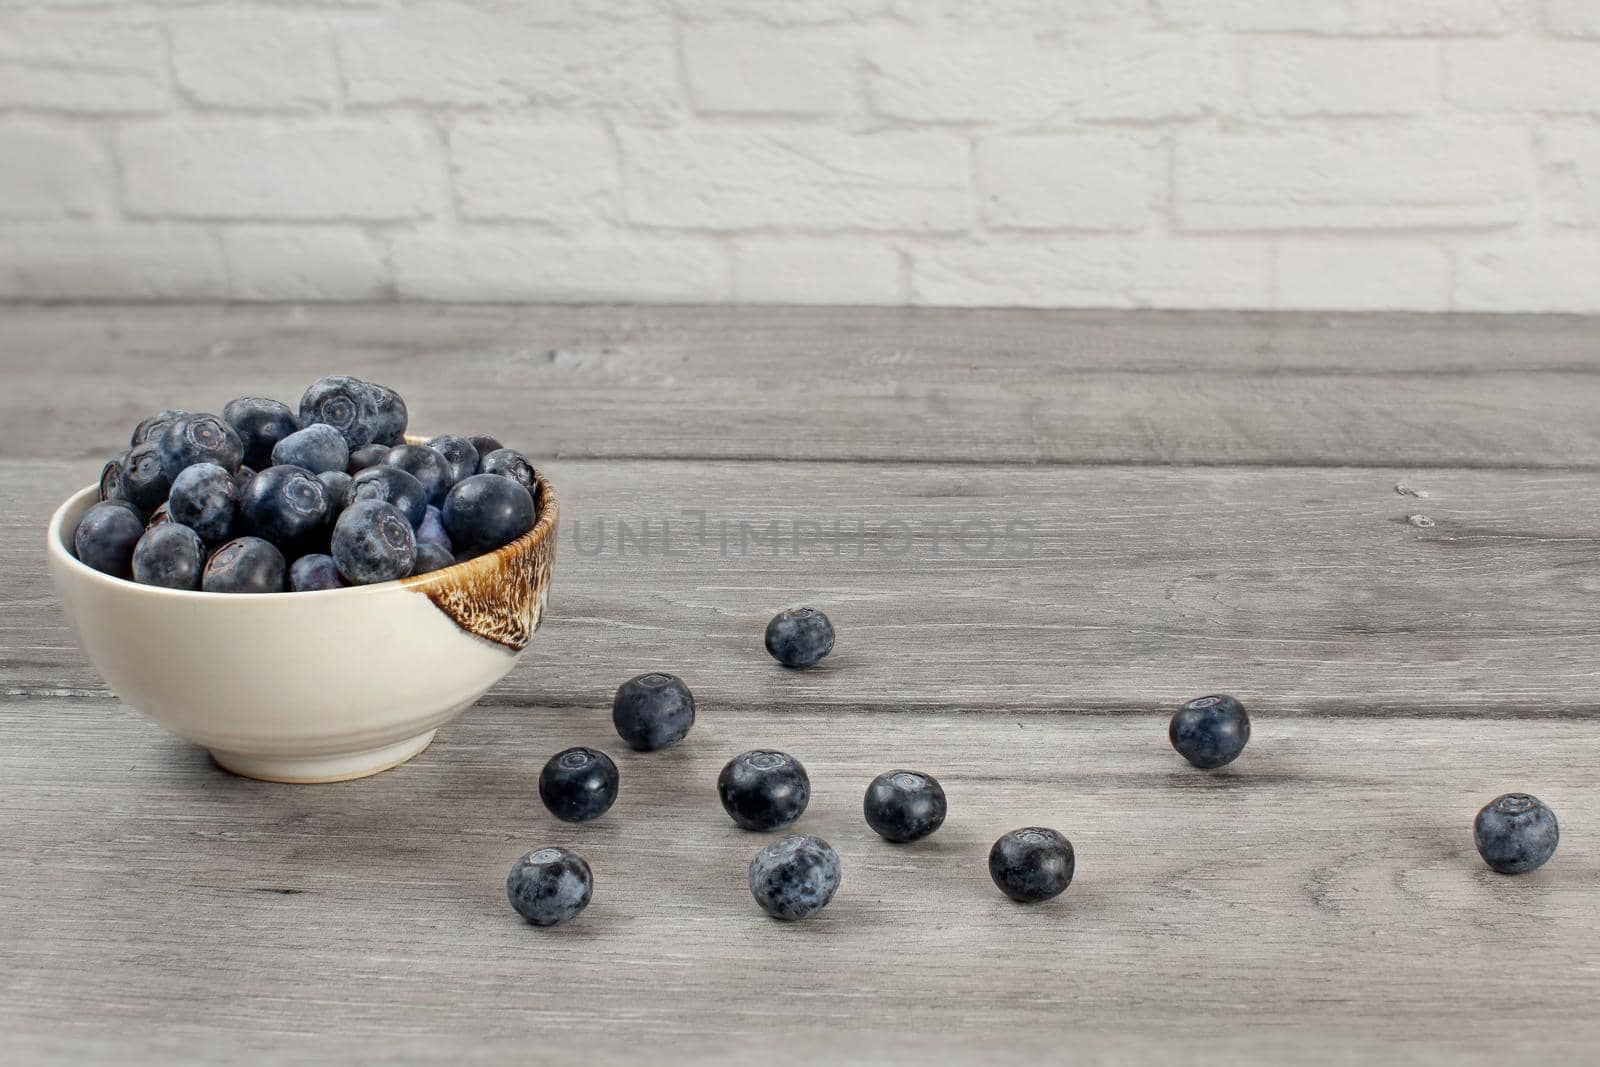 Small bowl full of blueberries, some of them spilled on gray wood desk.